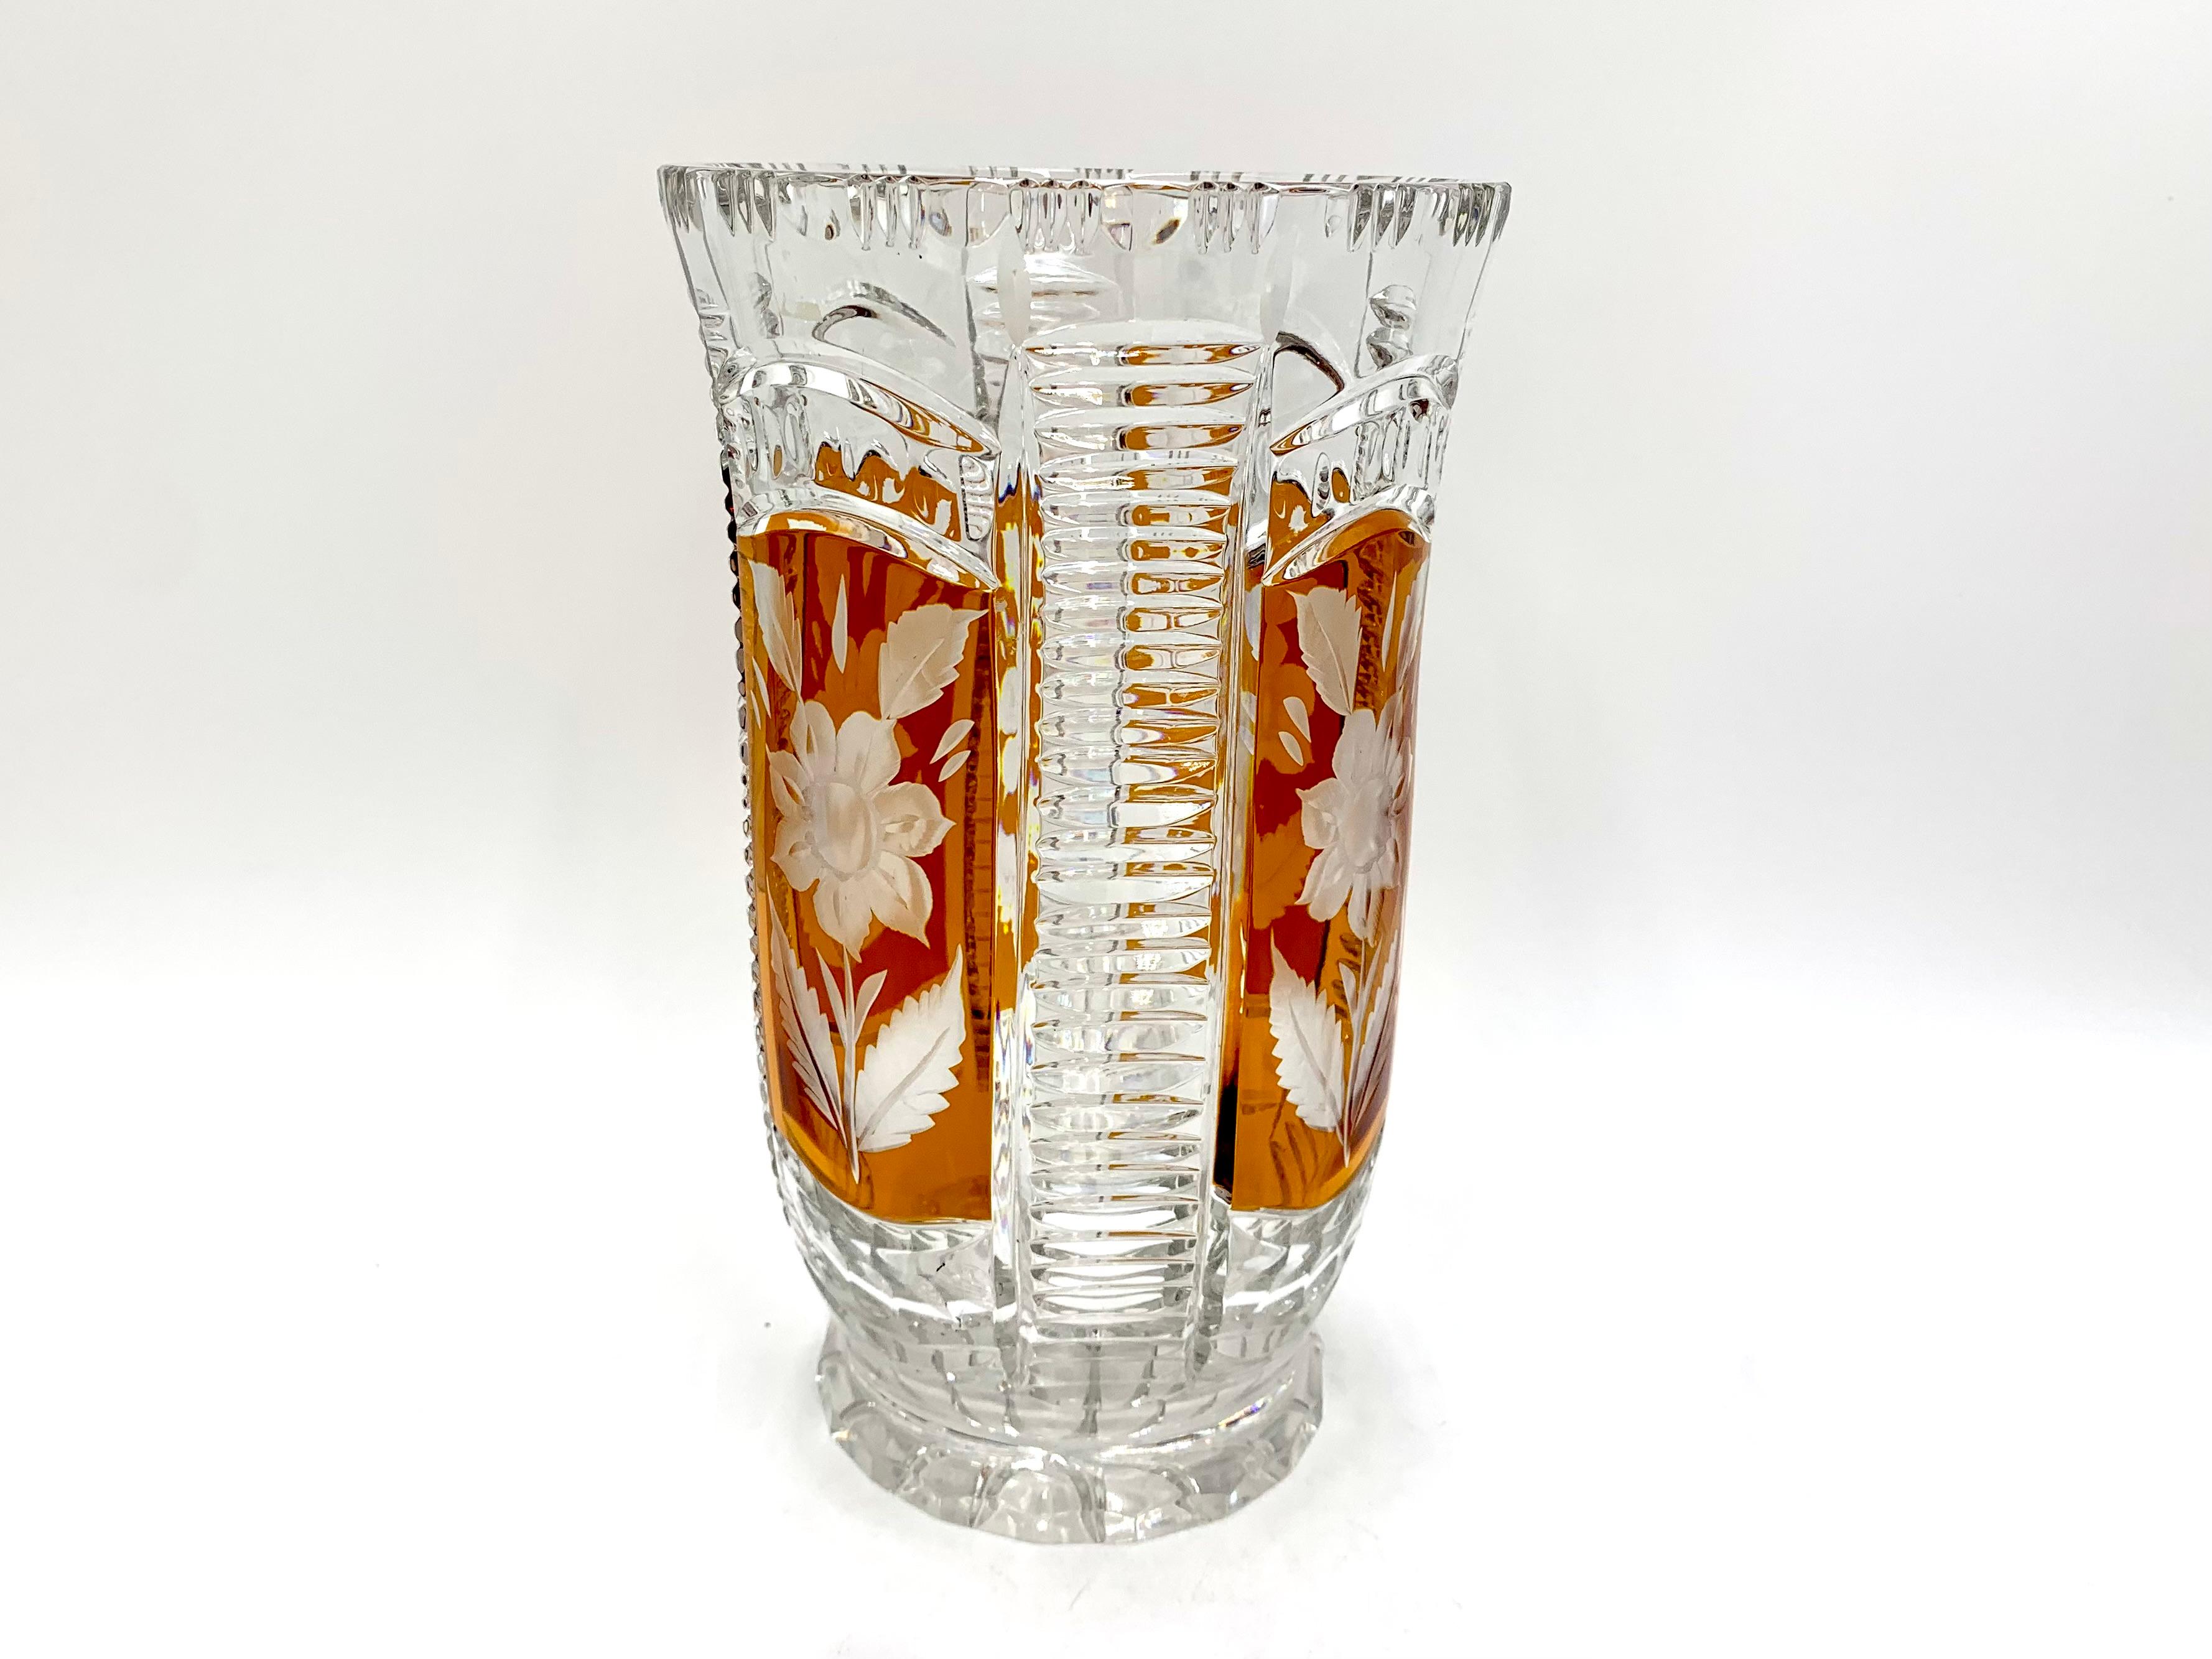 Crystal vase with honey glass and pattern. Produced in Poland by the Julia Glassworks in the 1960s.

Very good condition

Measures: Height 25cm, diameter 15cm.